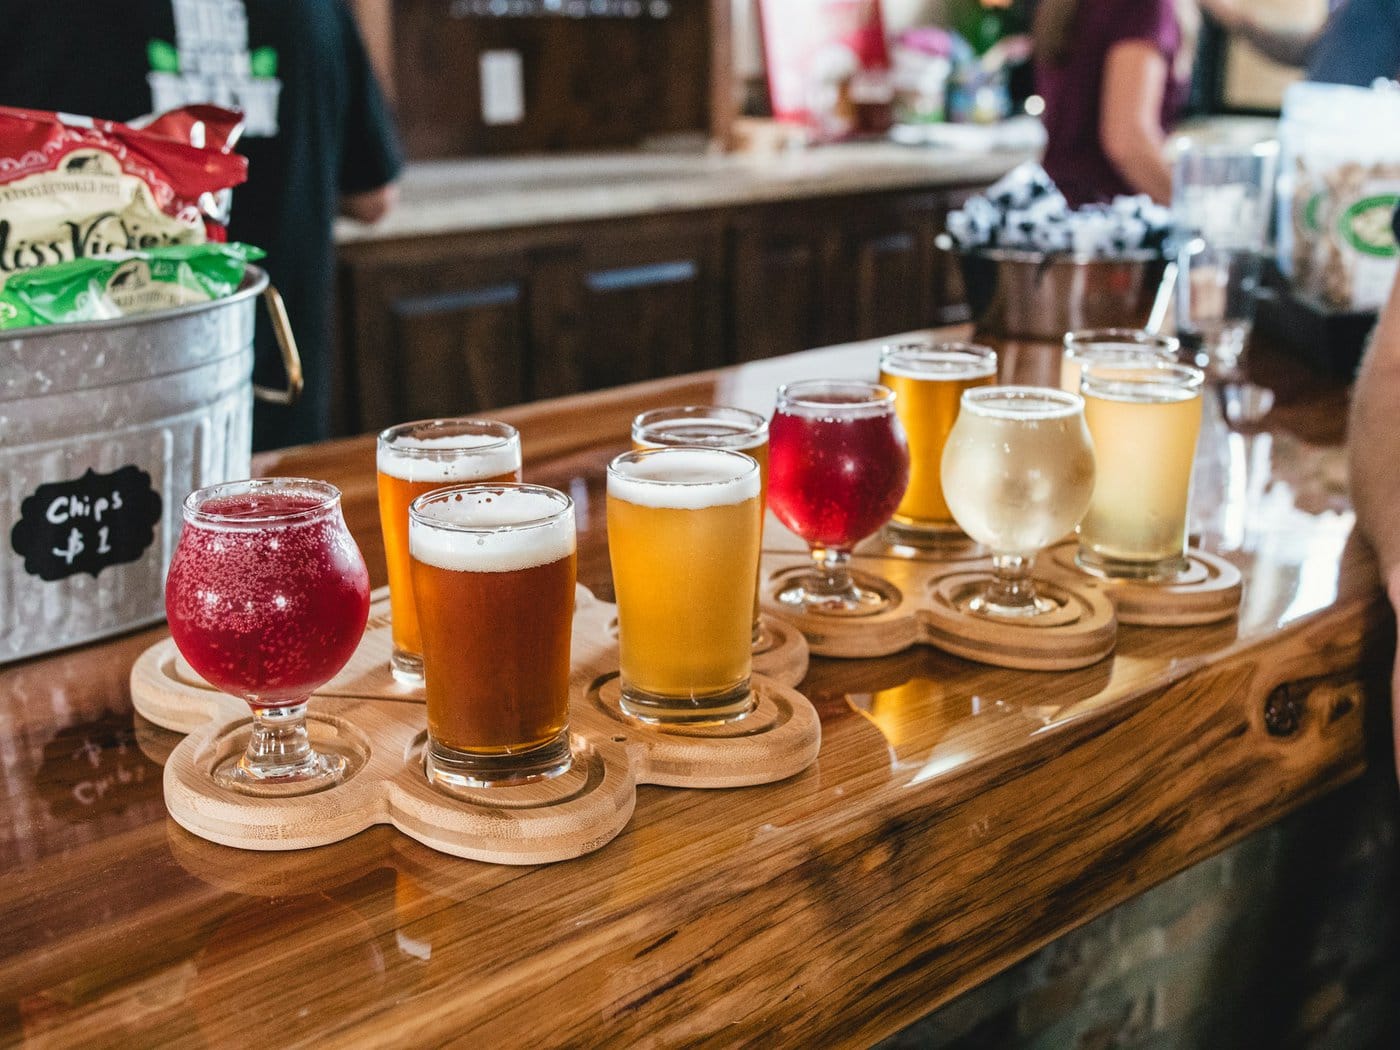 Various craft beers in glasses on wooden flight paddles arranged on a bar counter.